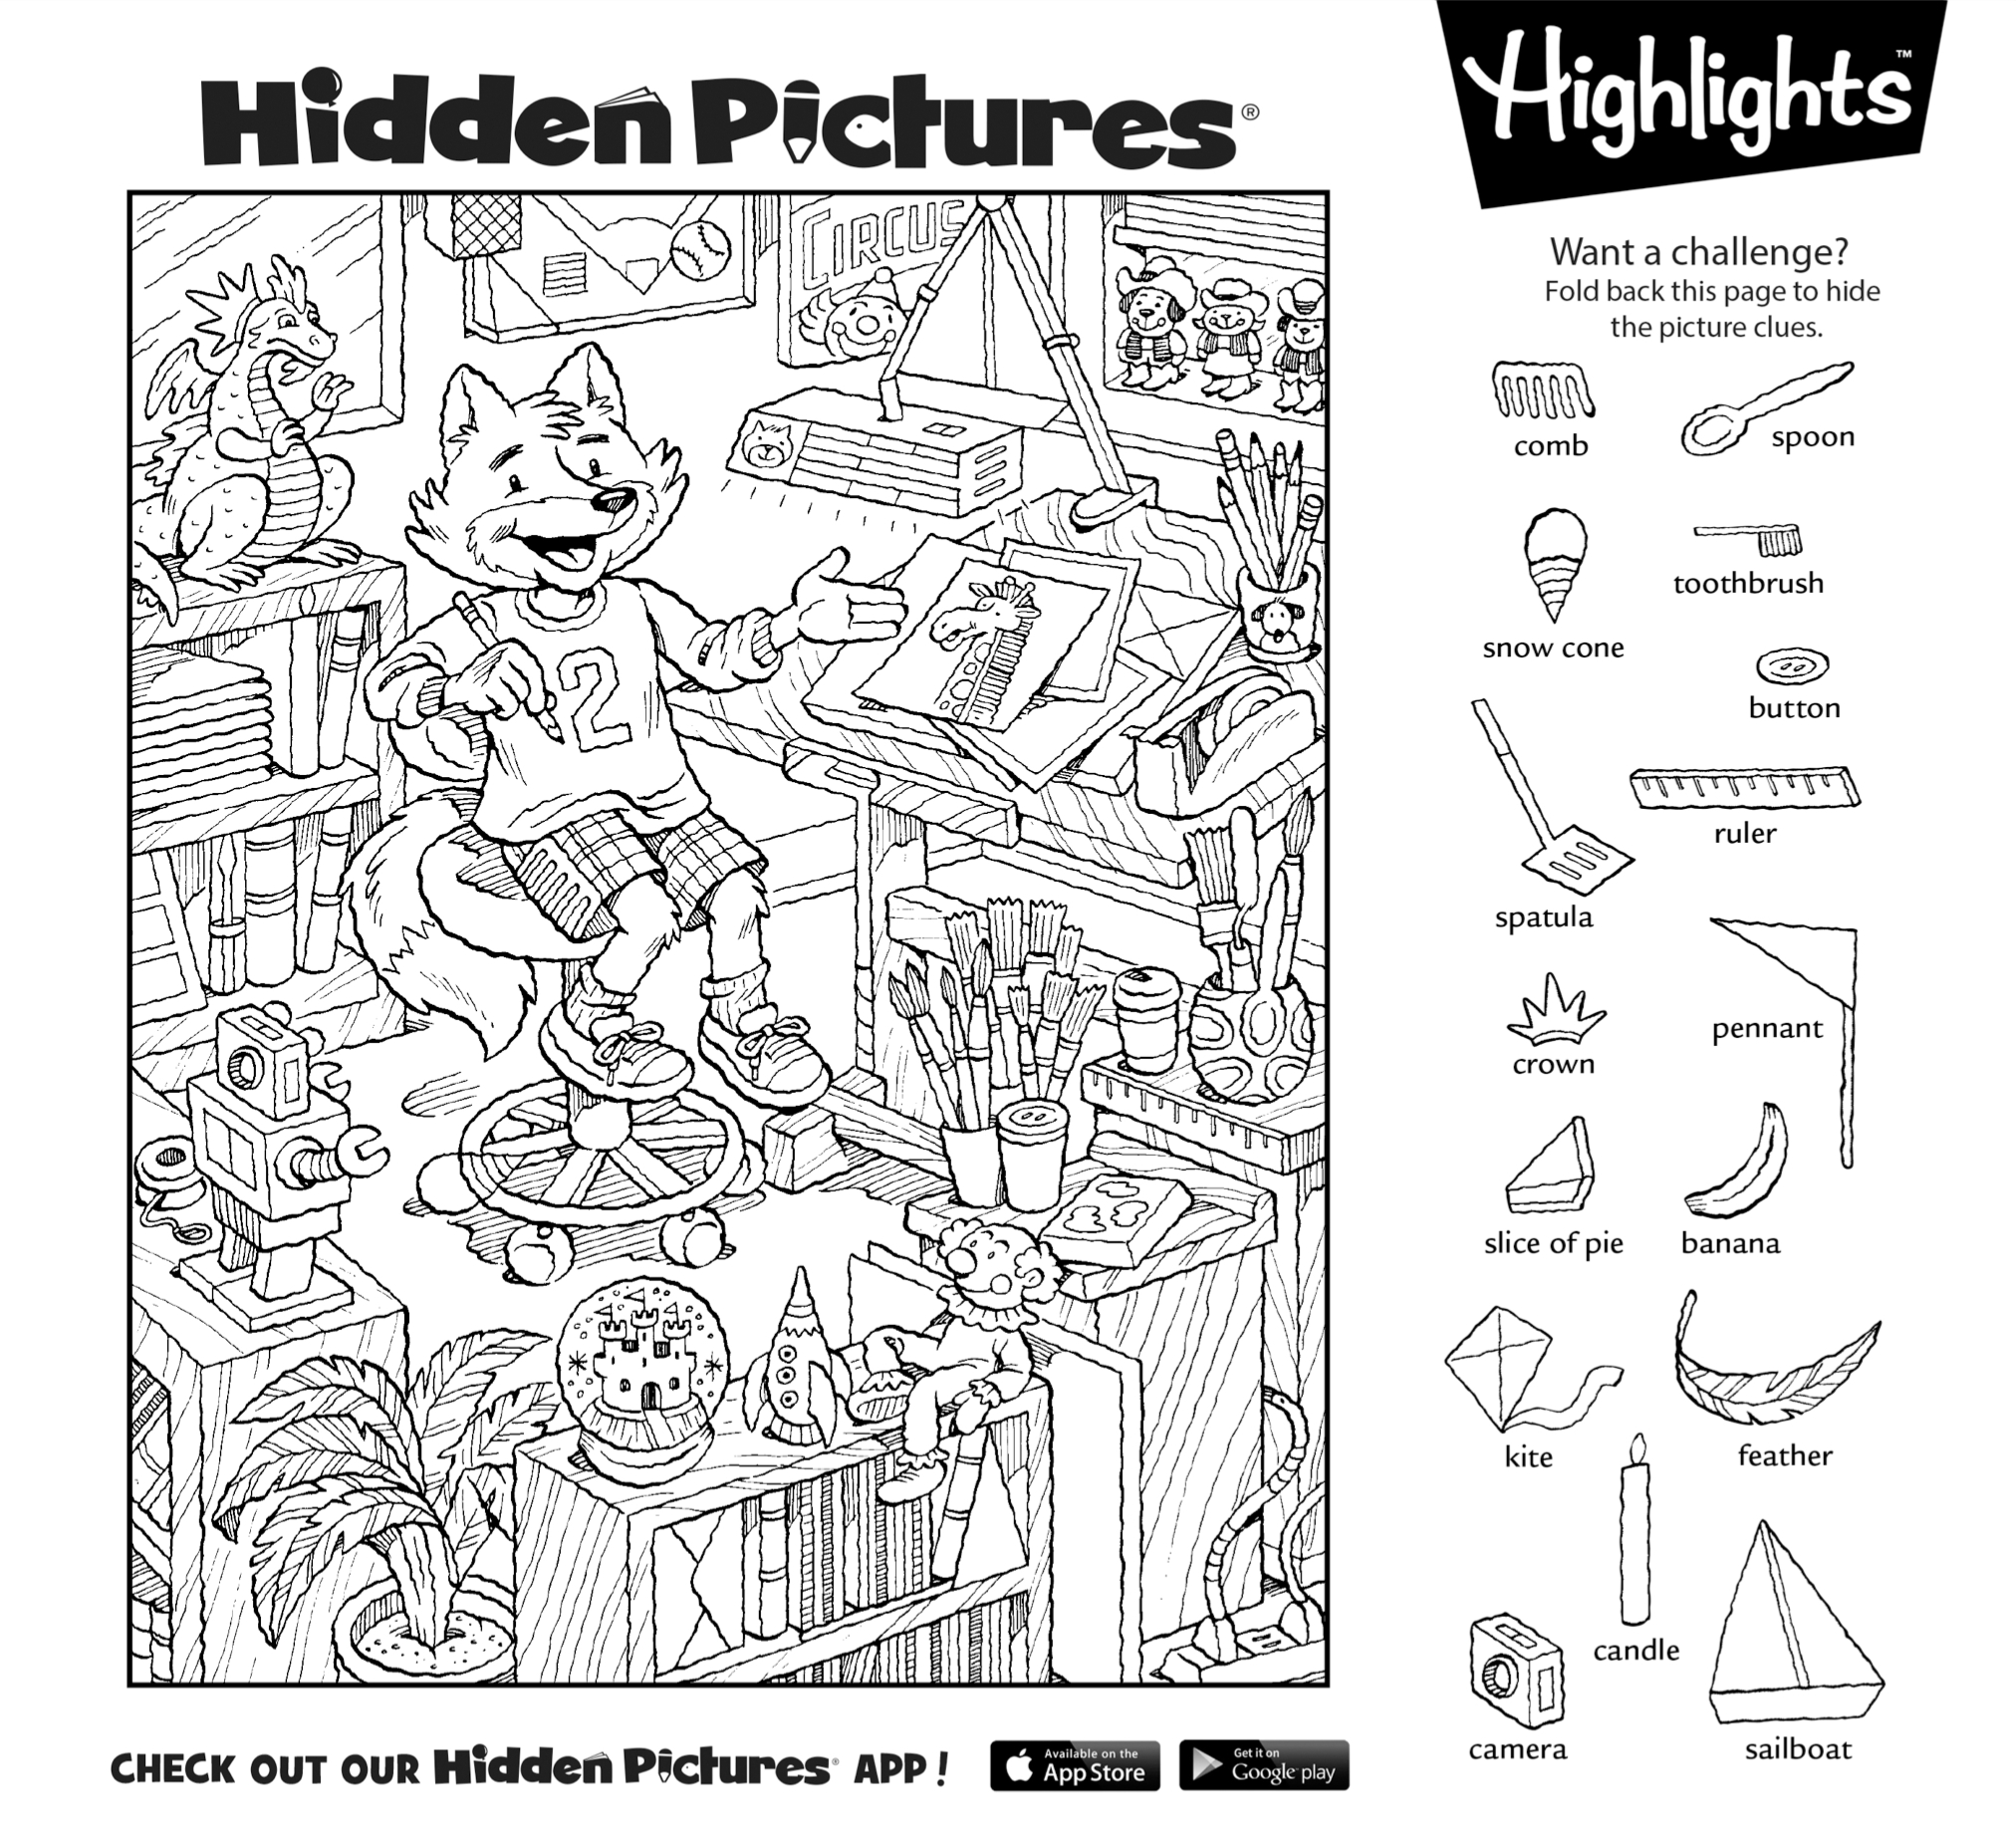 Download This Free Printable Hidden Pictures Puzzle To Share With - Free Printable Puzzles For 8 Year Olds